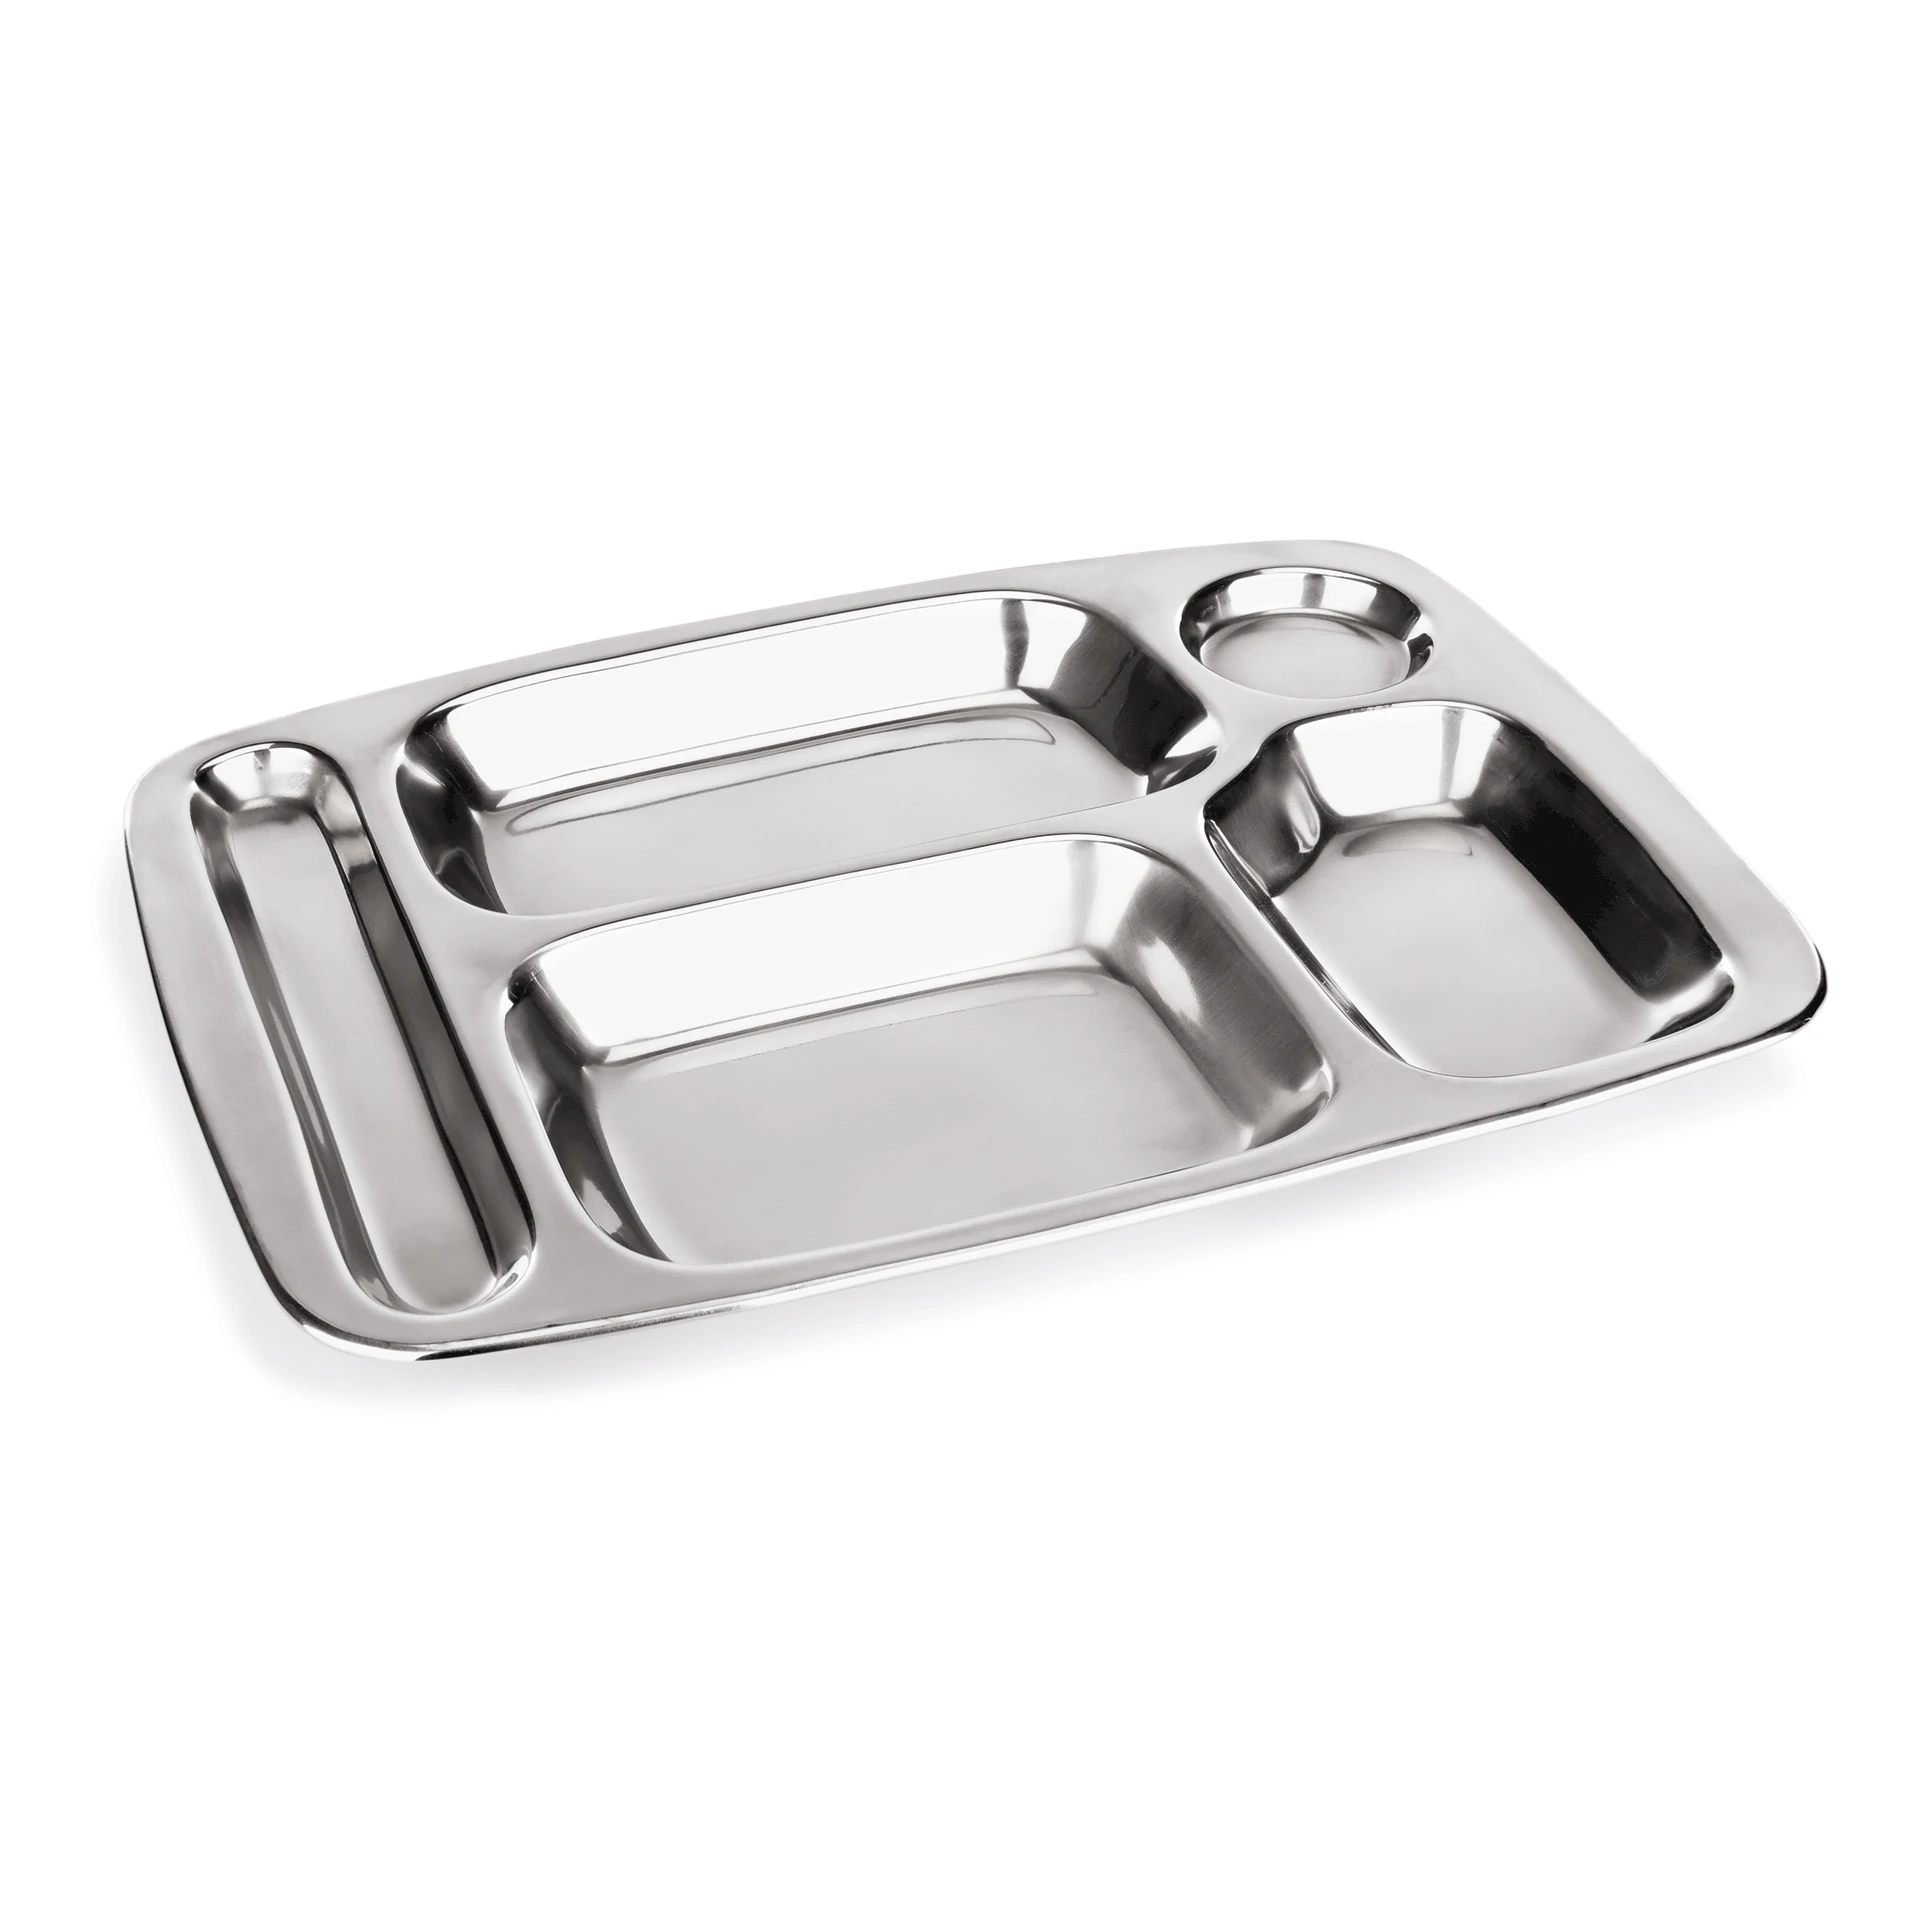 Compartment tray